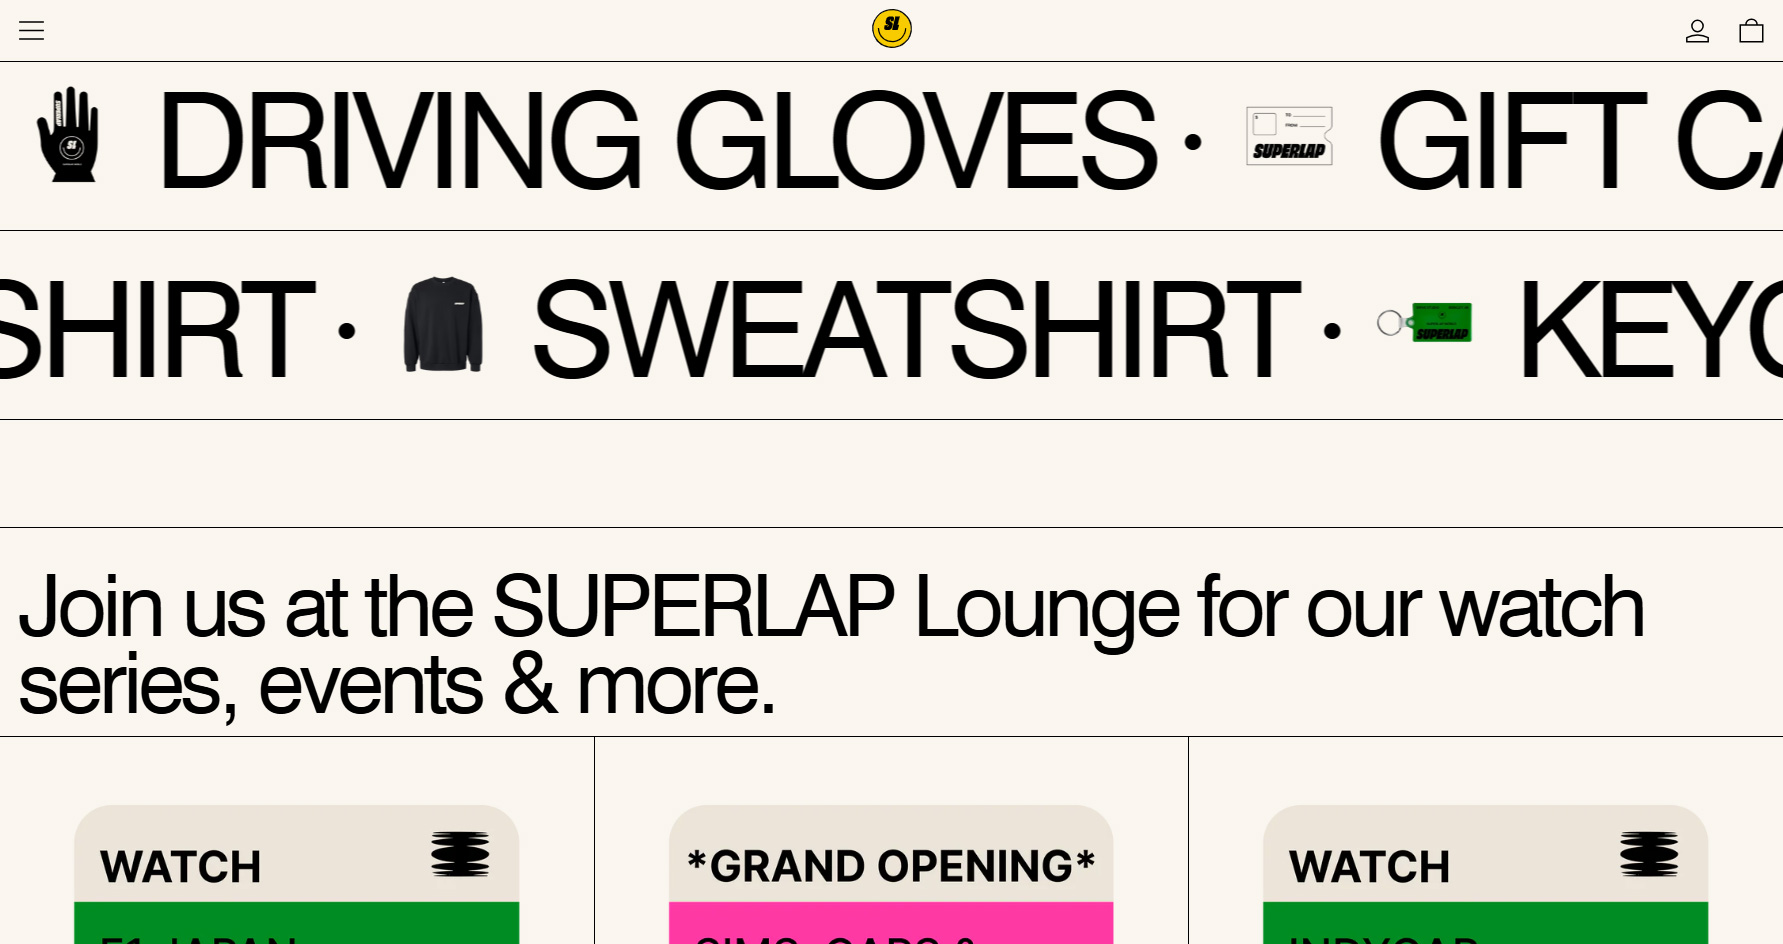 SUPERLAP - Website of the Day